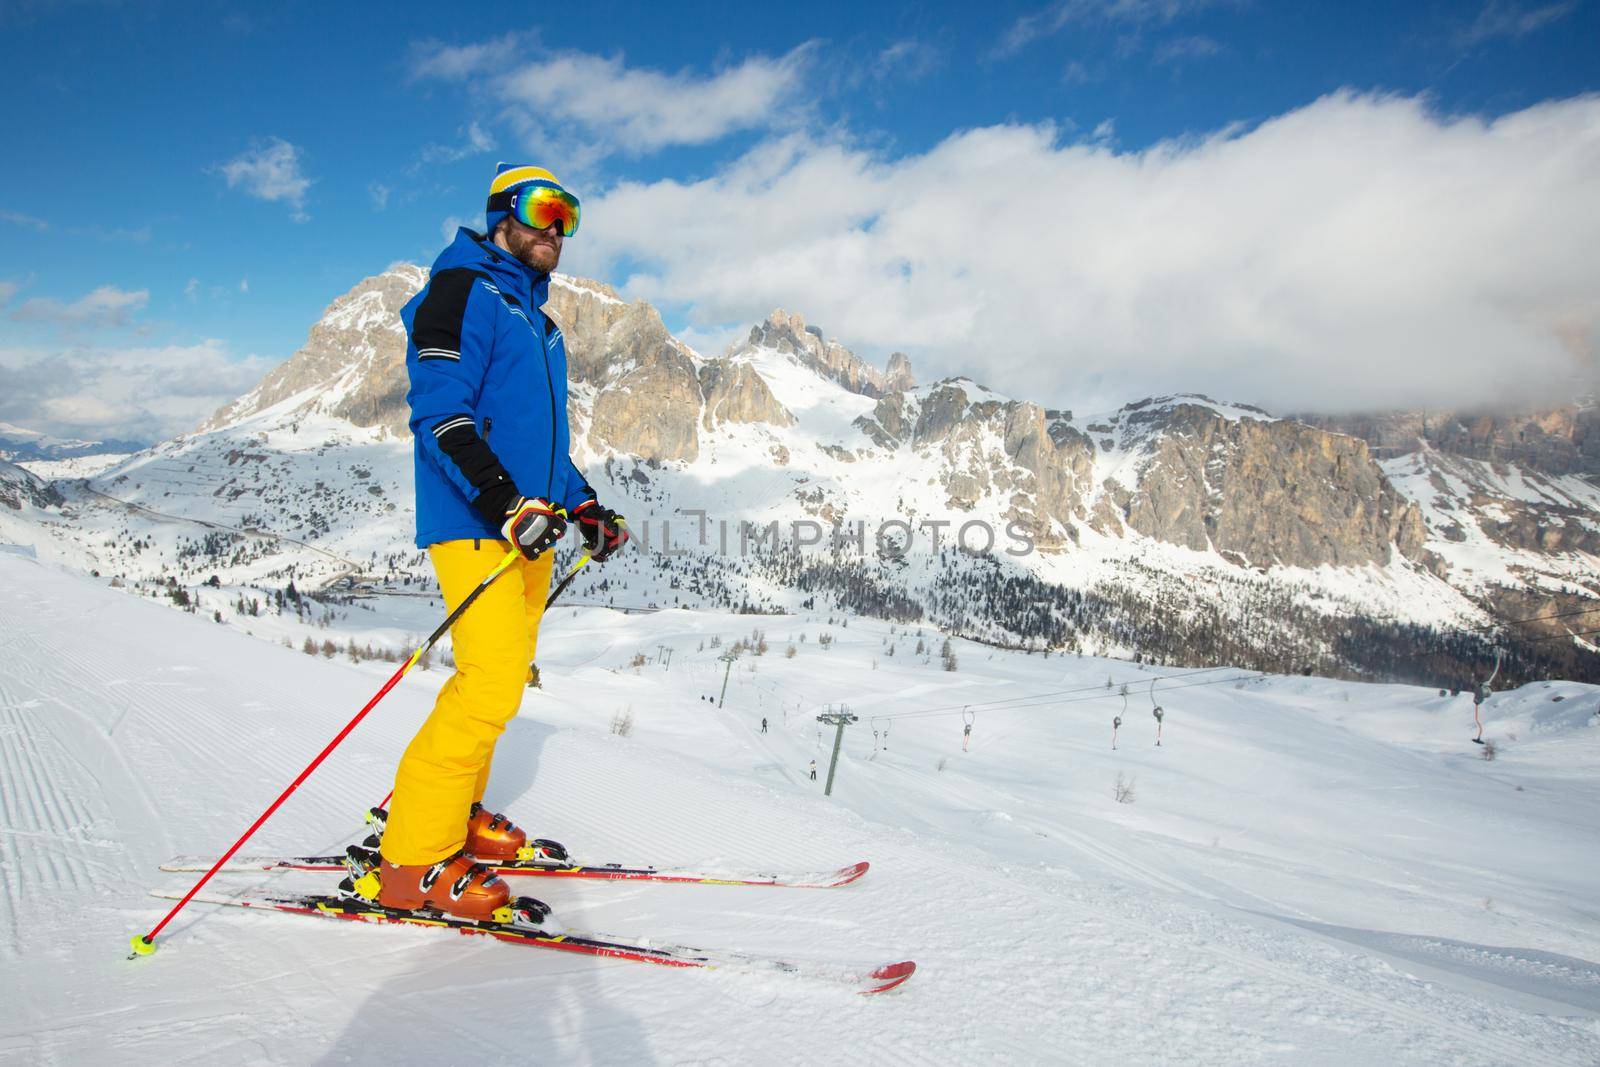 Alpine skier stand on slope in winter mountains Dolomites Italy in beautiful alps Cortina d'Ampezzo Col Gallina mountain peaks famous landscape skiing resort area